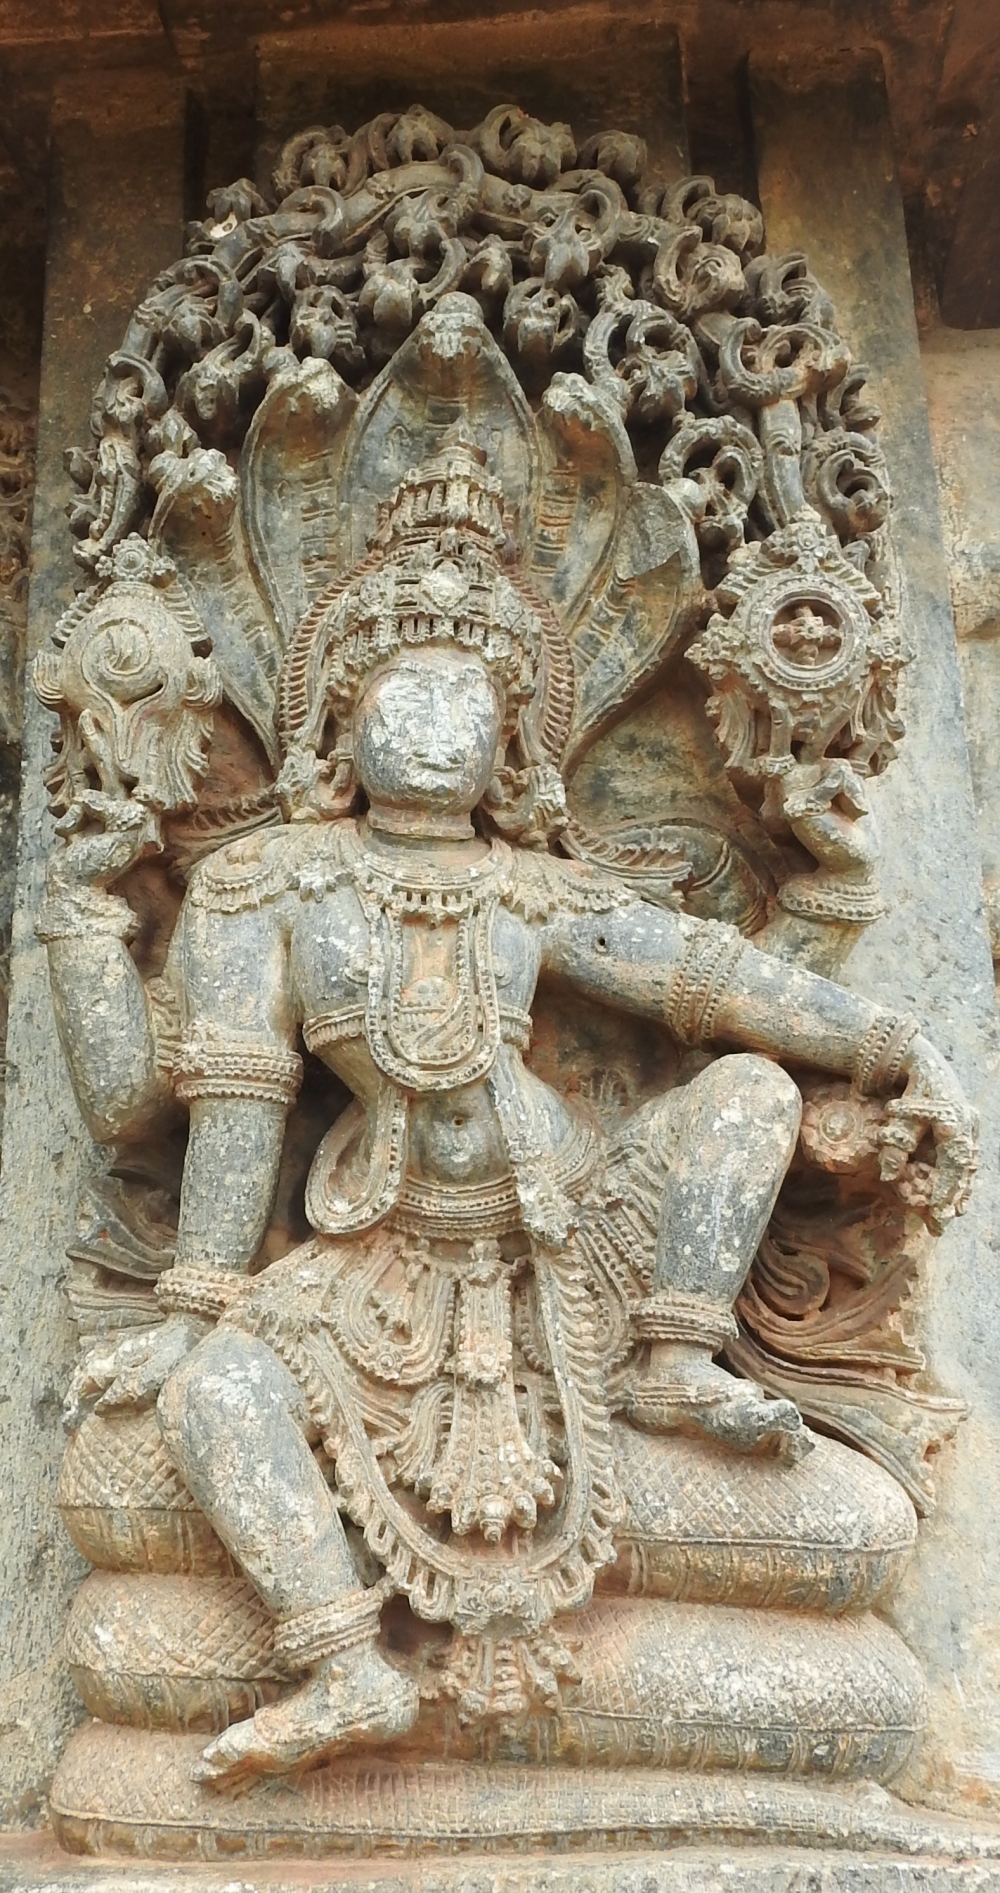 Fig. 10: The image of Adimurti or Para-Vasudeva (the transcendental being who controls the universe) seated on the coils of the serpent Ananta is displayed on the jangha. Para-Vasudeva holds conch and discus in his upper two hands, and the five hoods of Ananta serve as a parasol